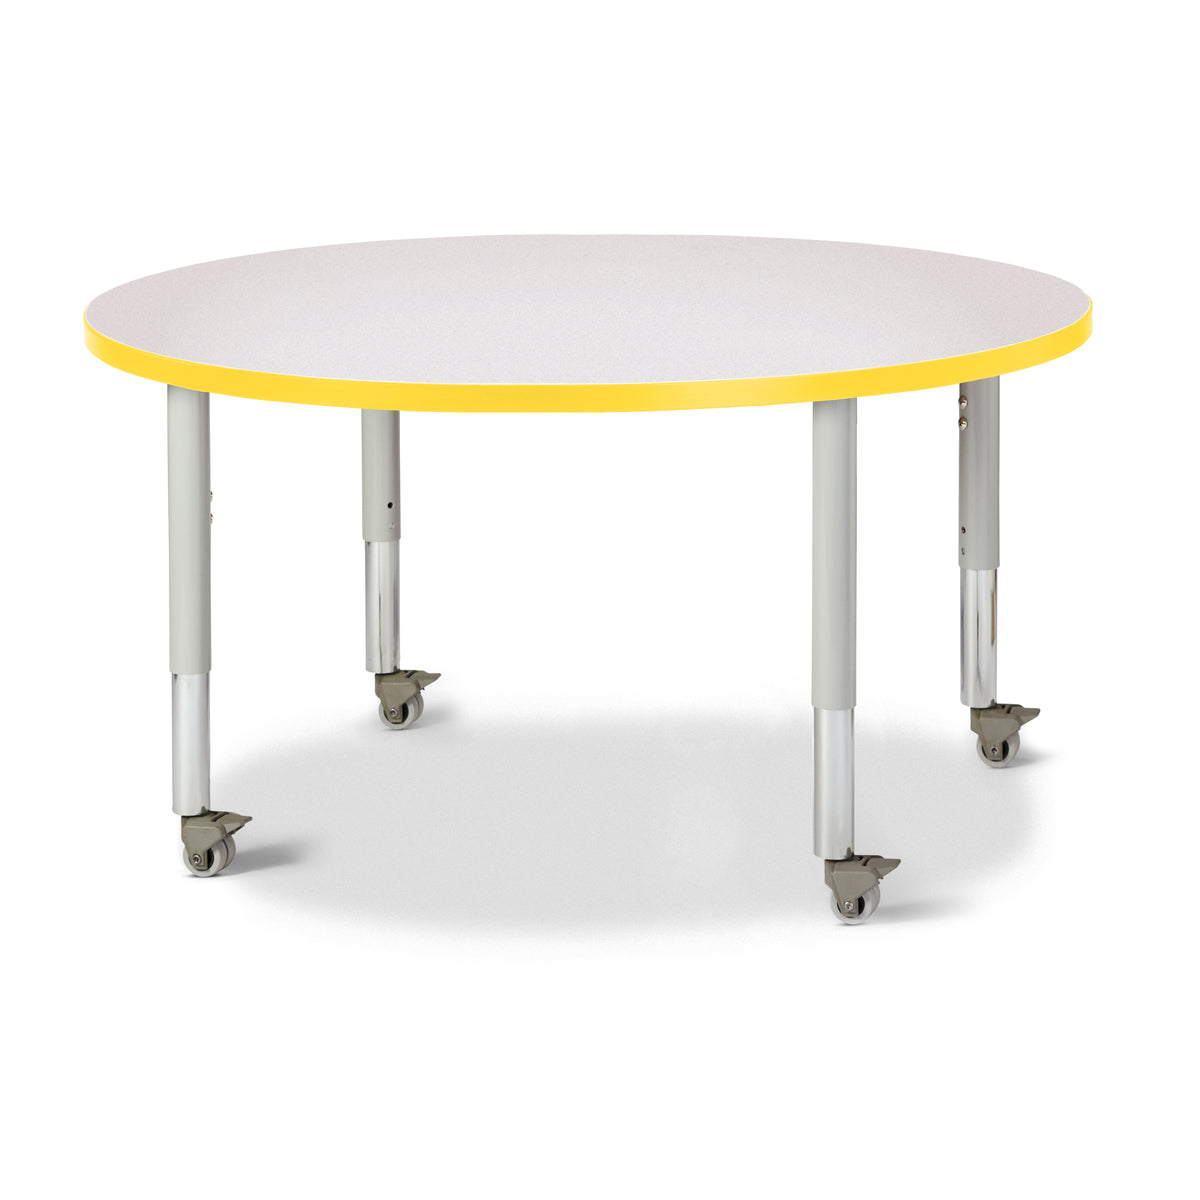 6468JCM007, Berries Round Activity Table - 42" Diameter, Mobile - Freckled Gray/Yellow/Gray